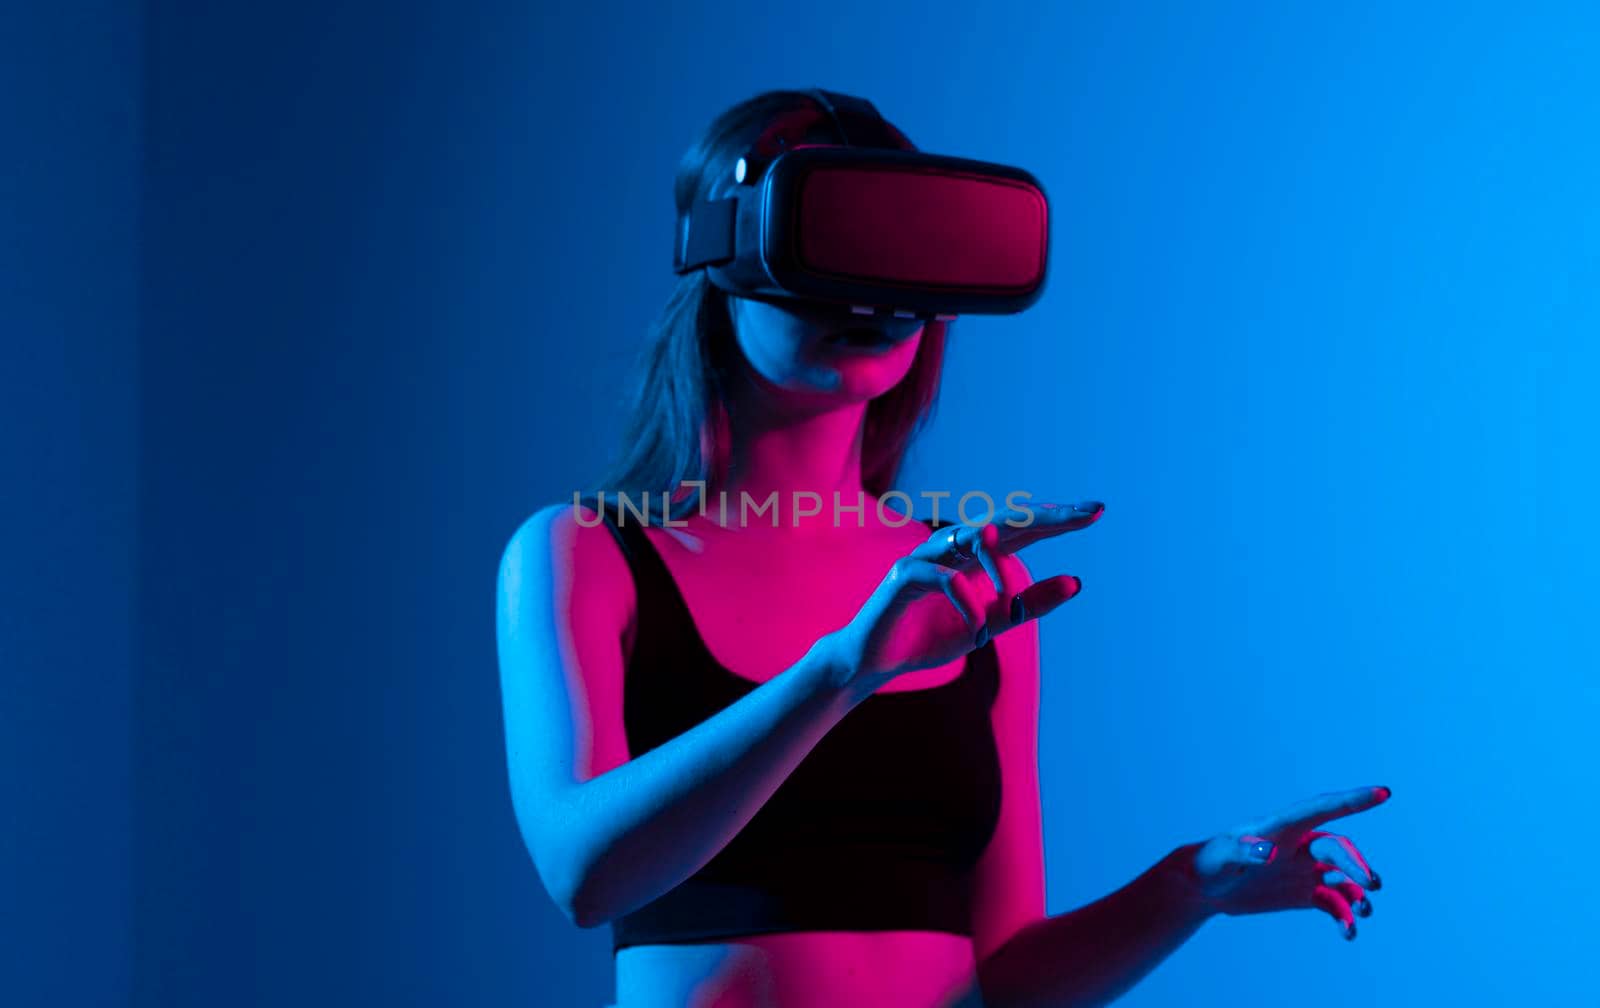 Portrait of woman video game designer wearing VR headset and interact with virtual environment or application